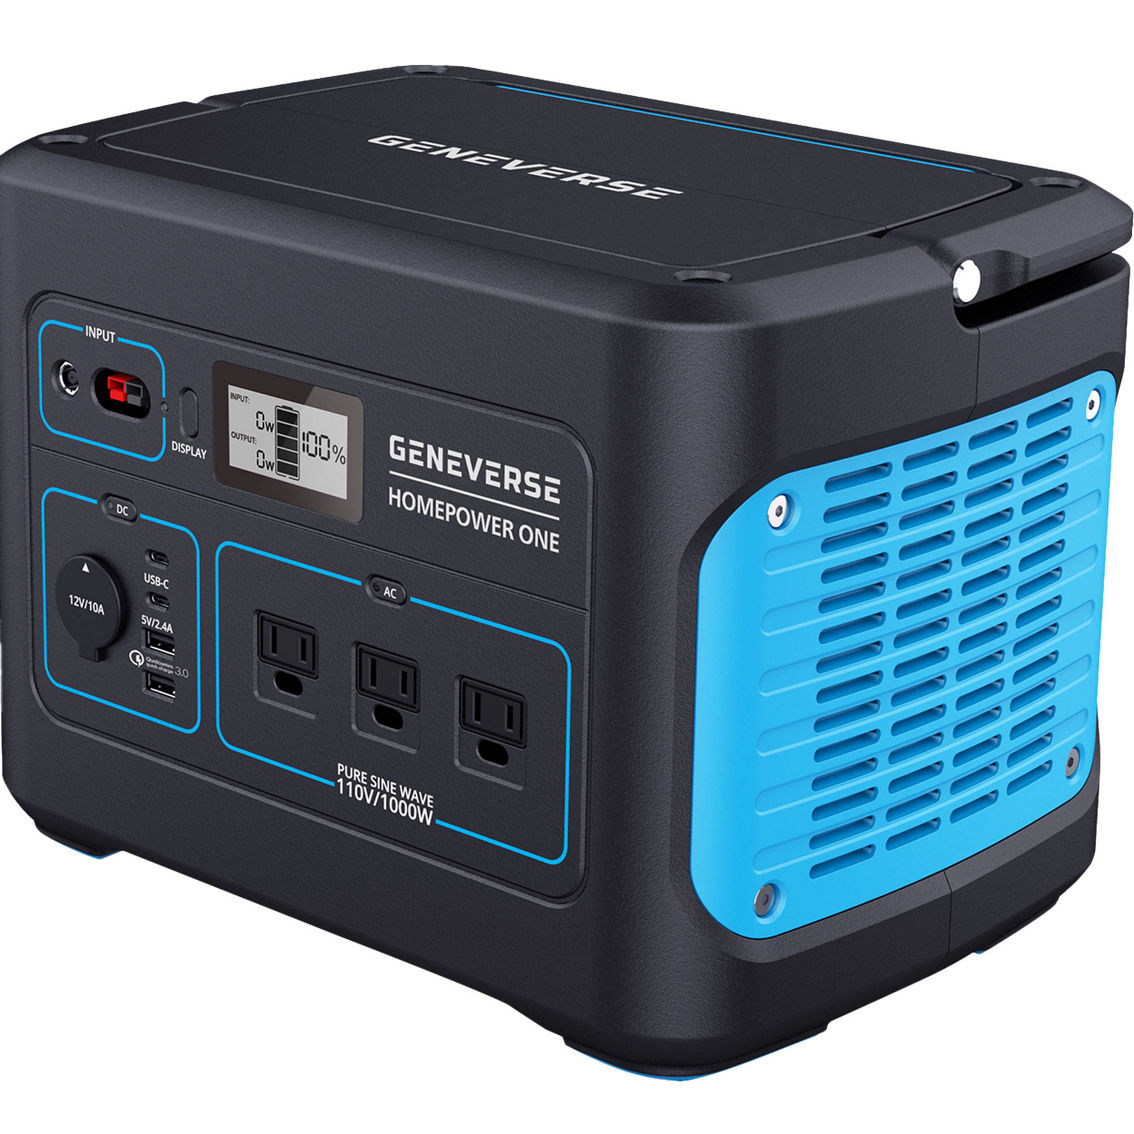 Geneverse HomePower One Battery Backup Power Source - Image 2 of 10